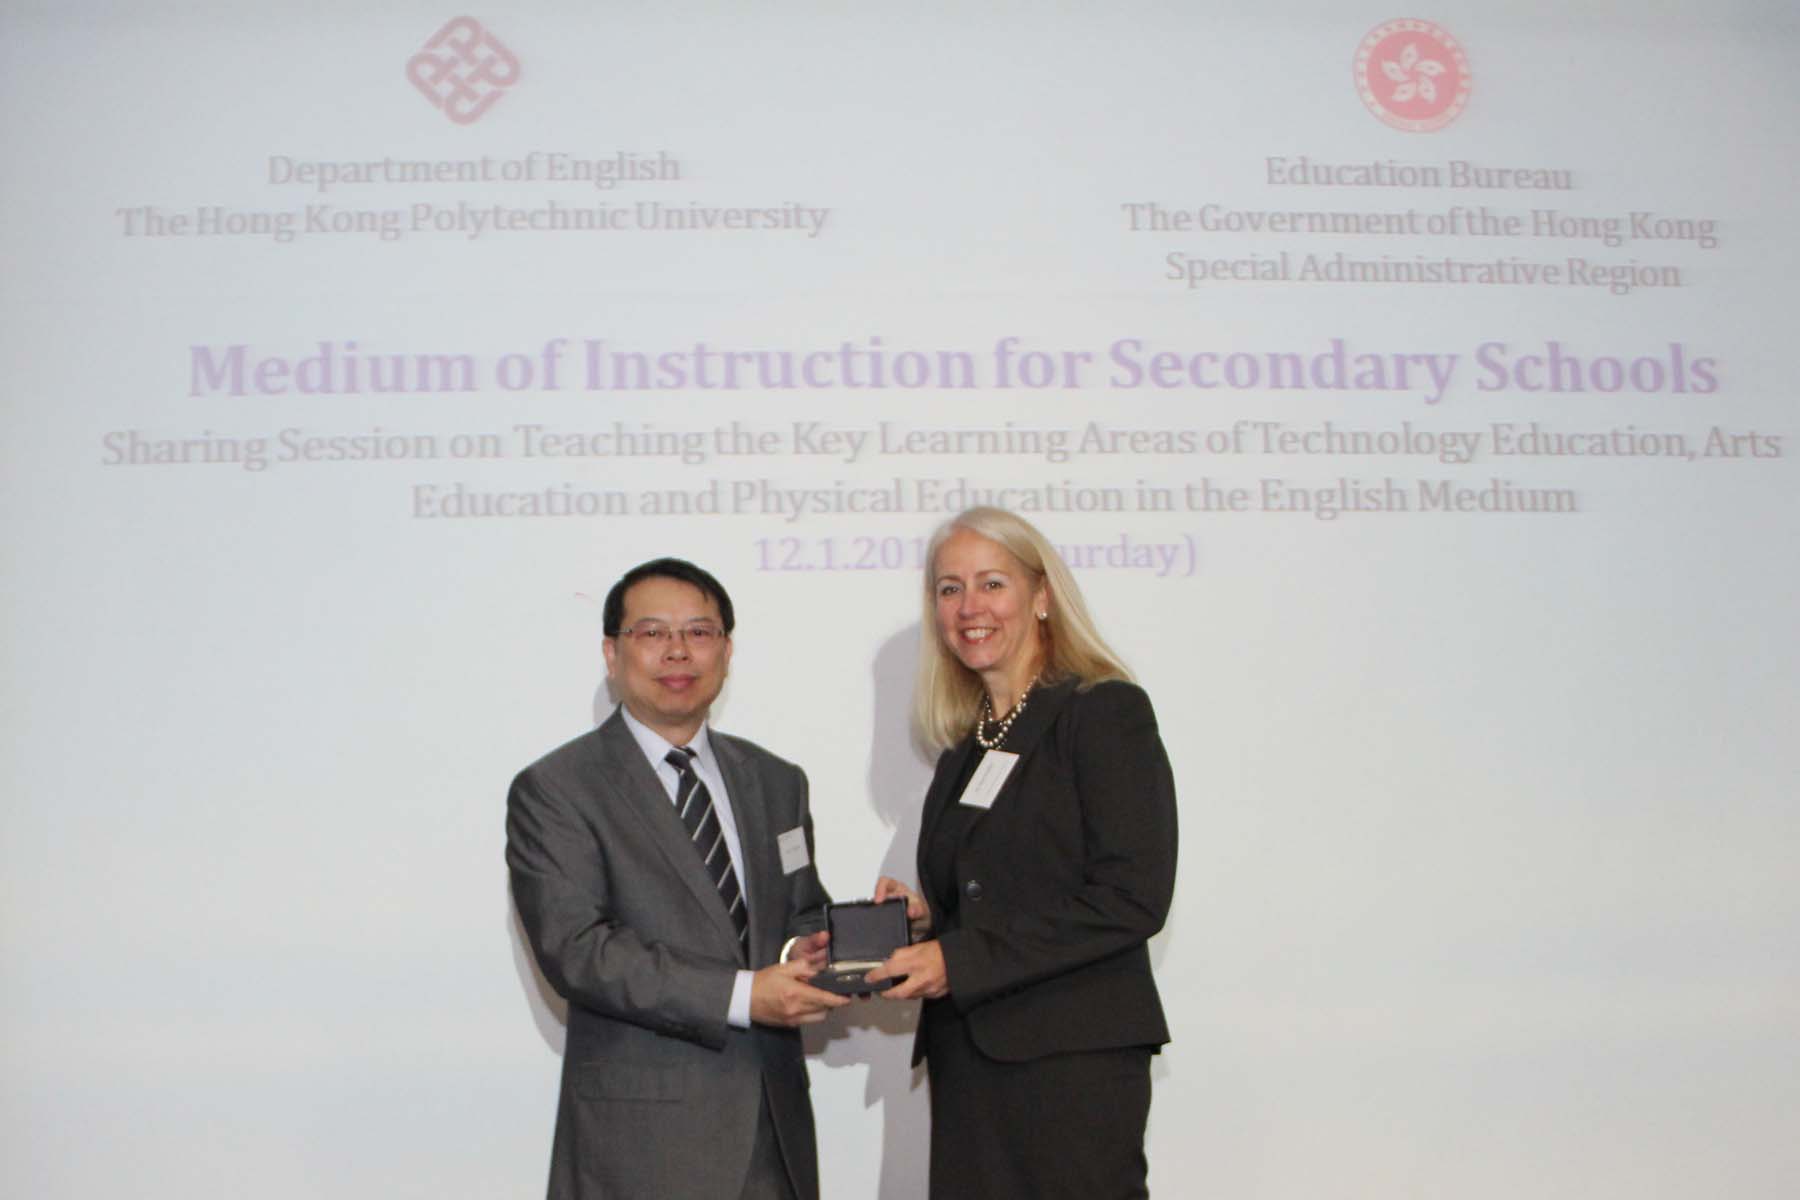 Presenting Souvenirs by Mr P W WAI, Principal Education Officer (Education Commission and Planning), Education Bureau to Dr Gail FOREY, Course Consultant, Associate Professor, Department of English, The Hong Kong Polytechnic University